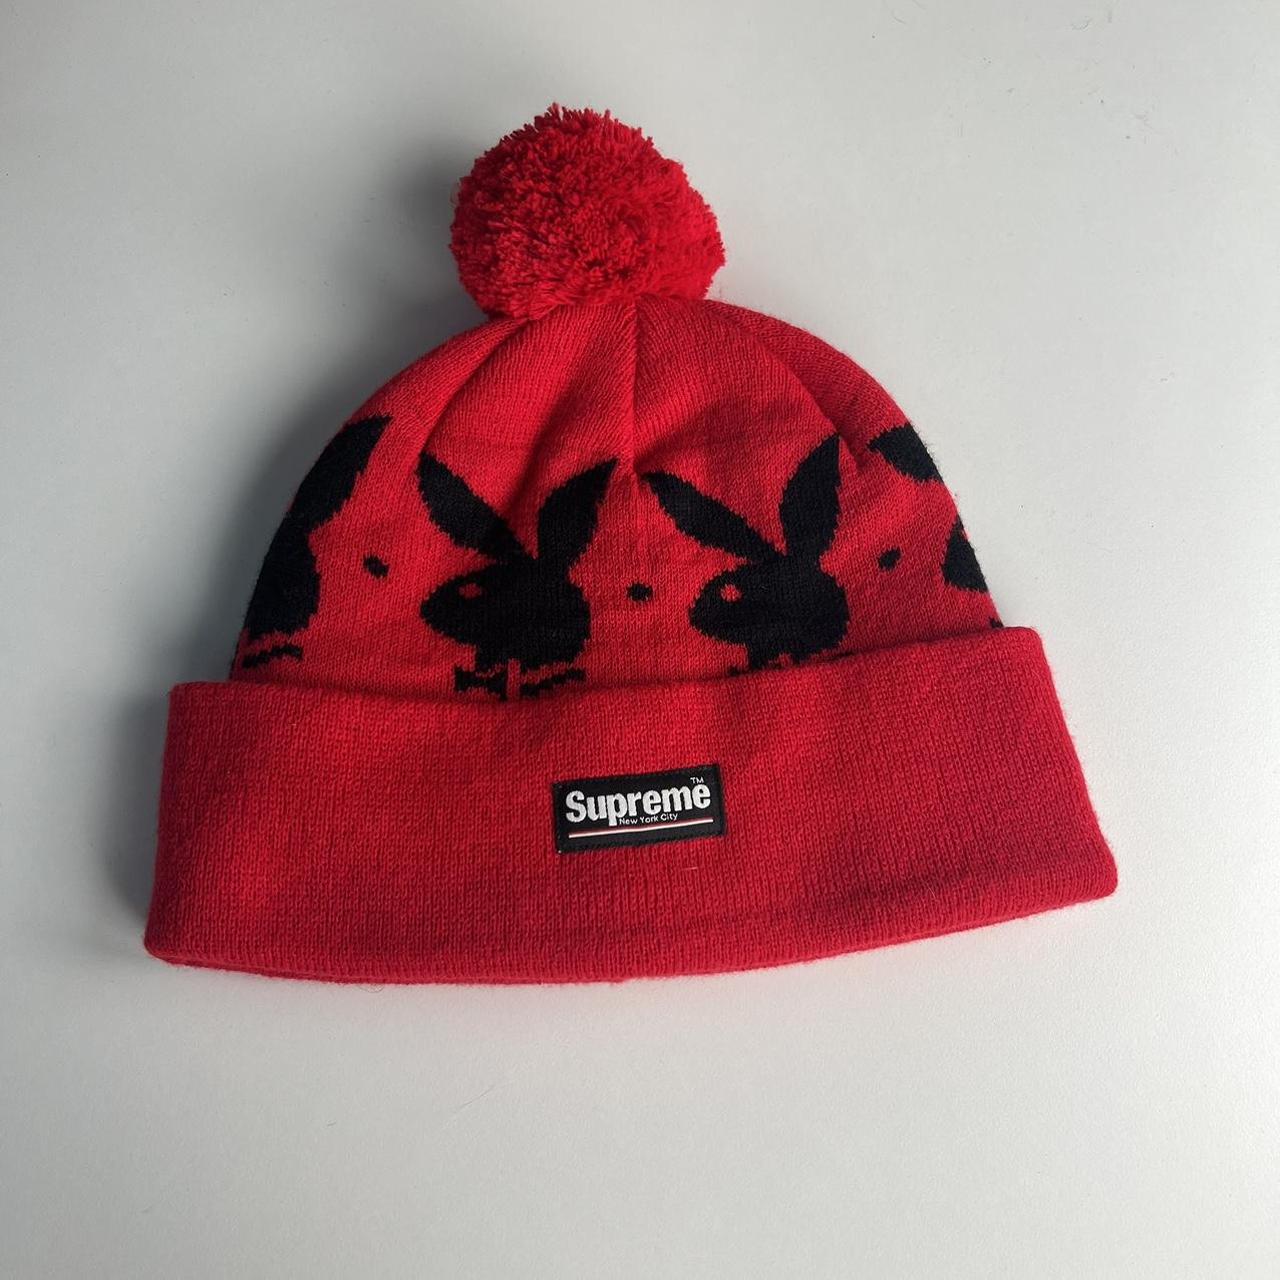 Supreme Beanie Hats for Men for sale